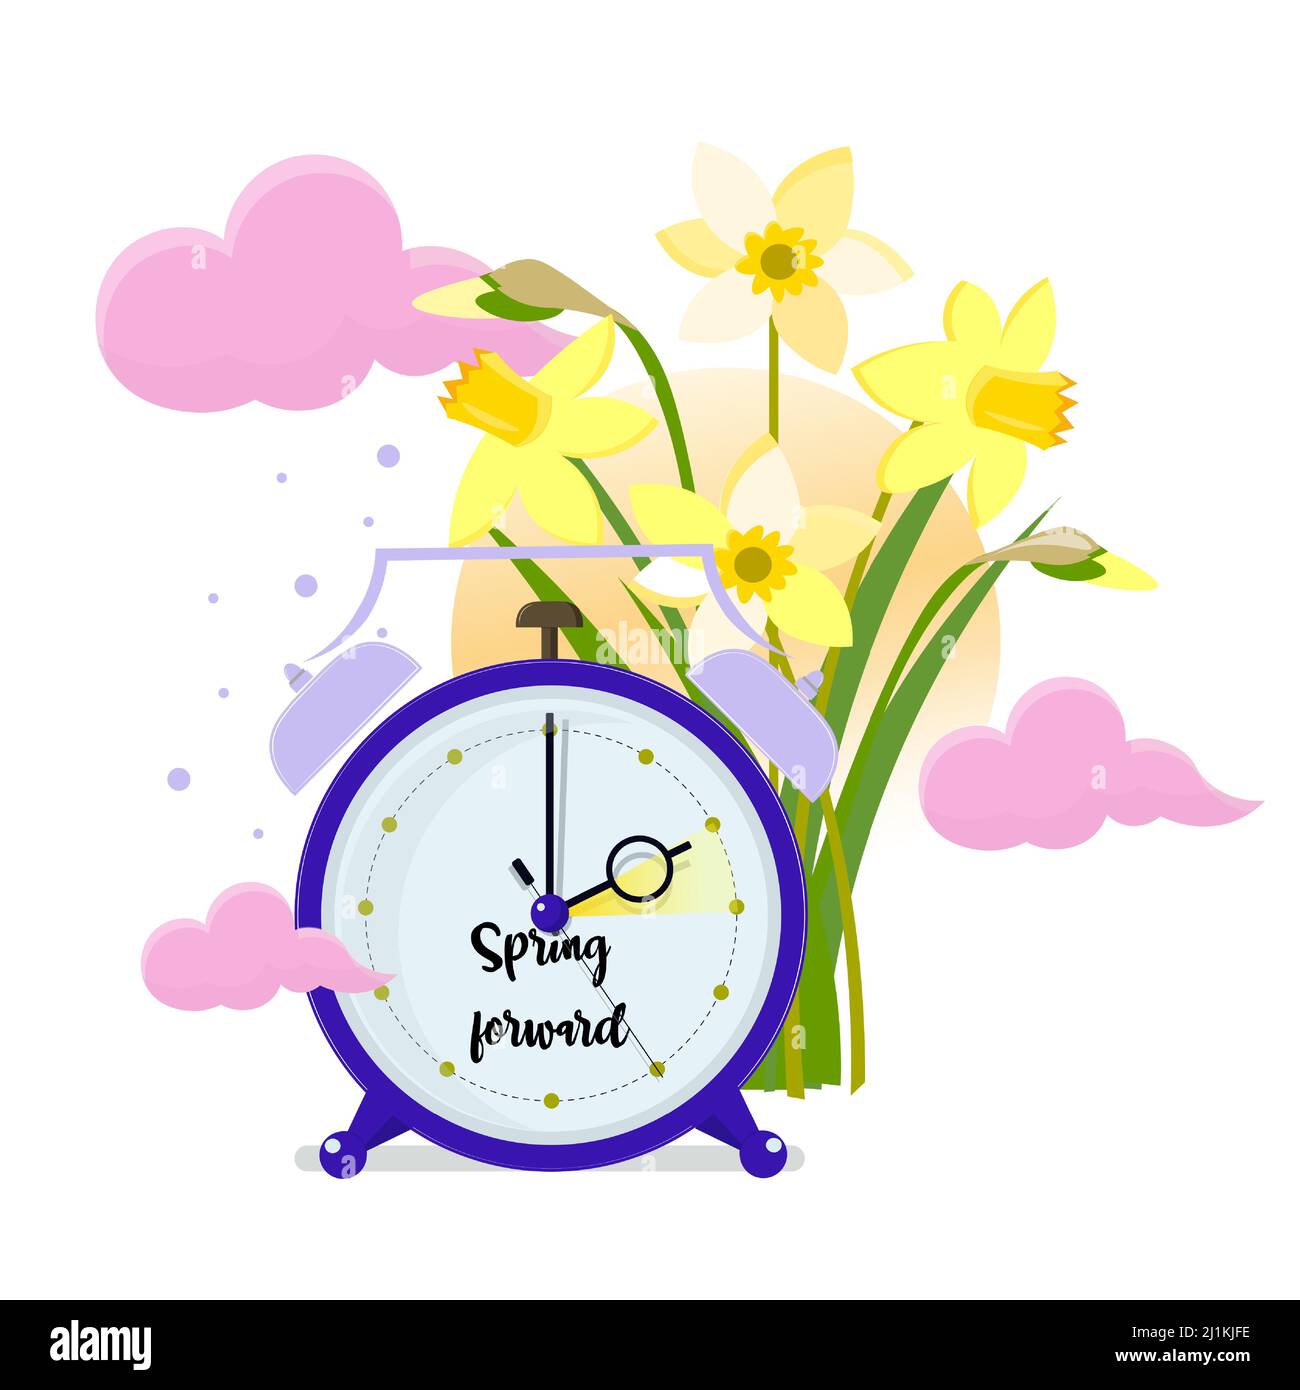 Premium Vector  Daylight saving time march 12 2023 concept clock set to an  hour ahead spring forward summer time